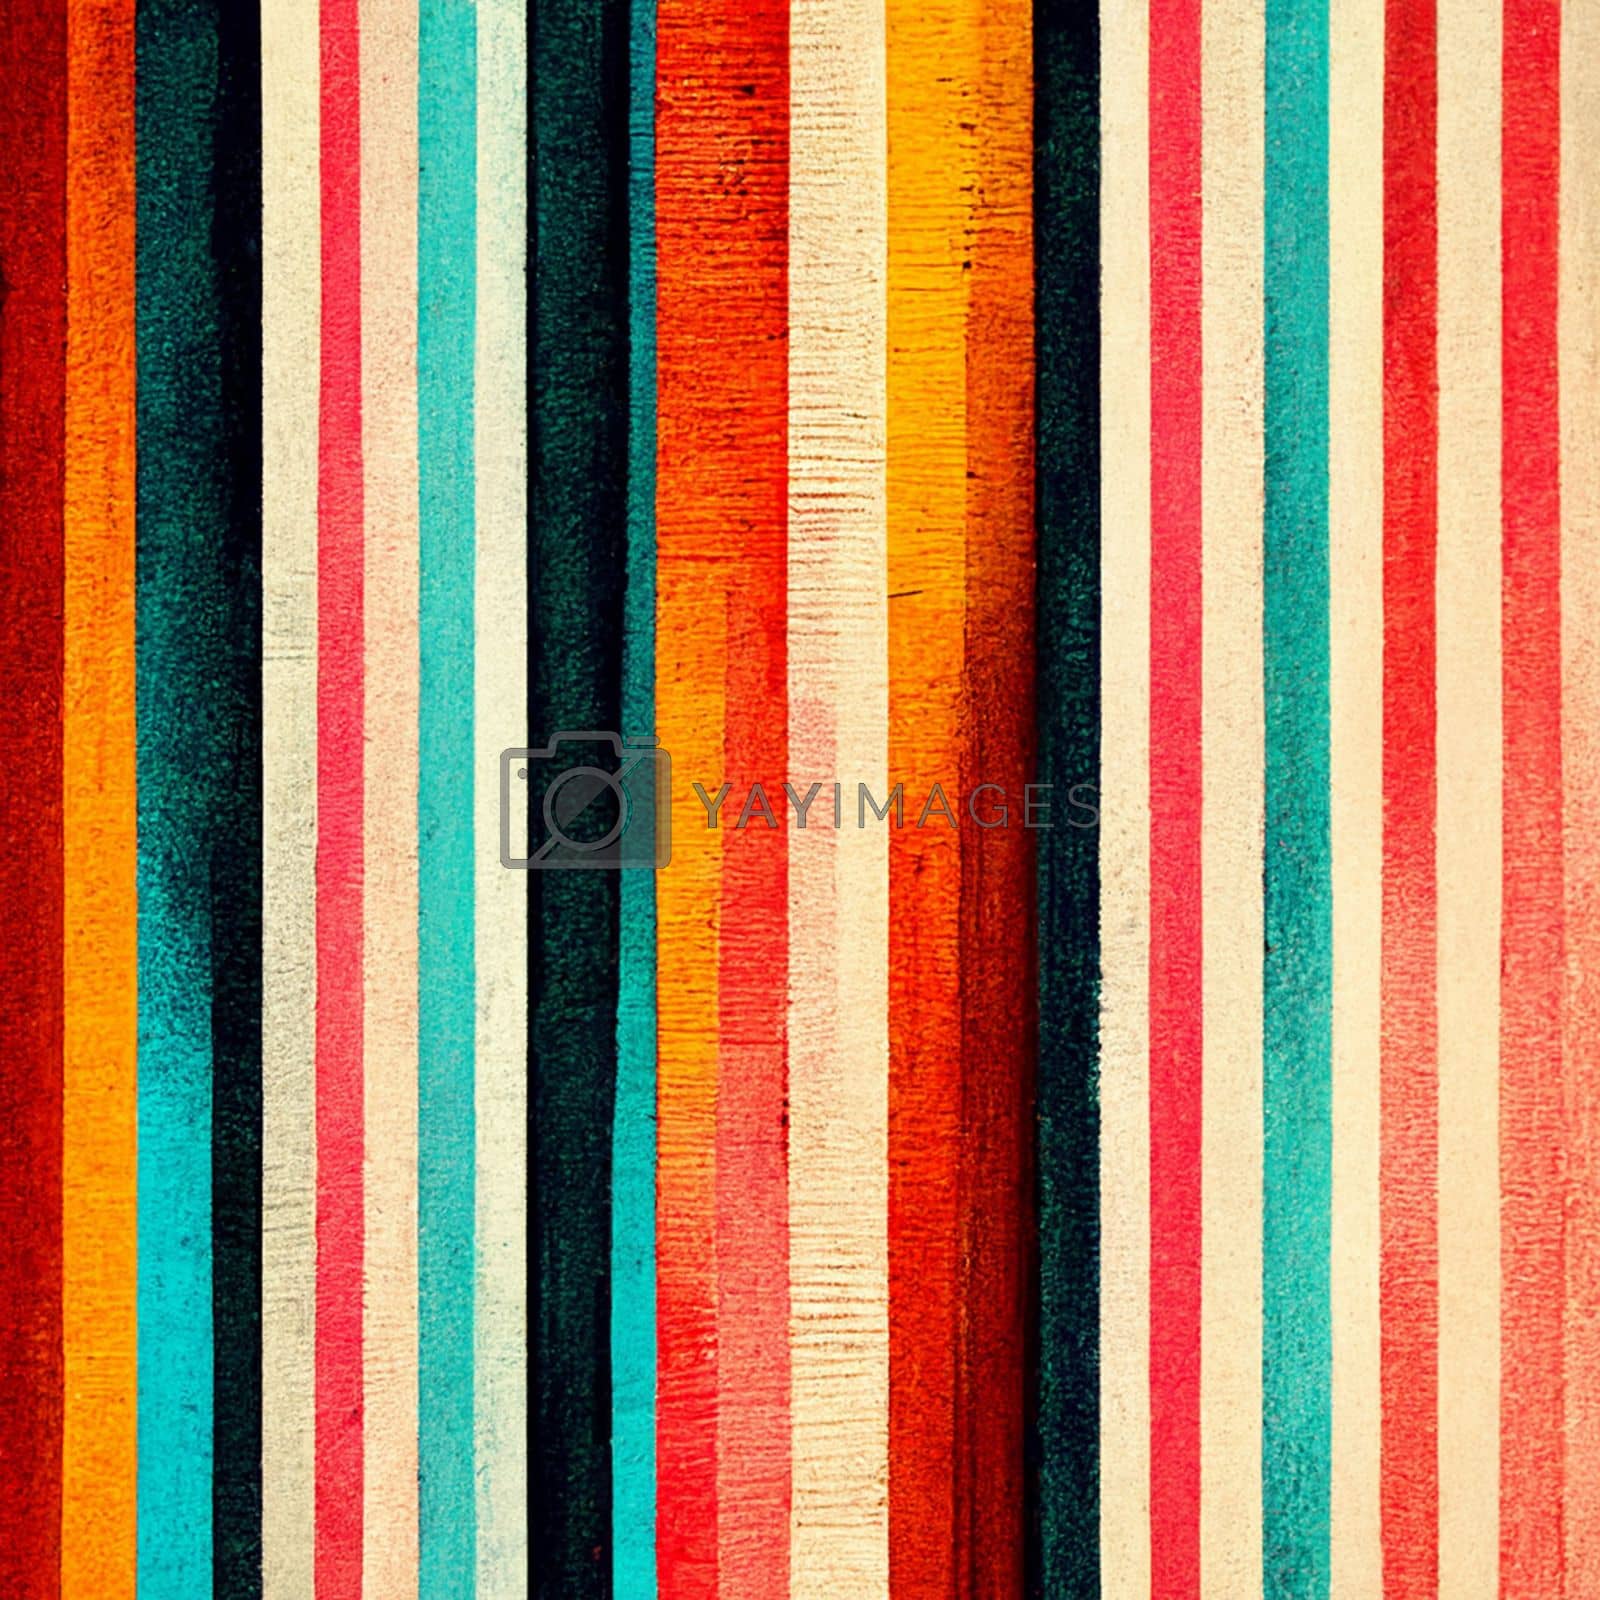 Royalty free image of Artistic abstract artwork textures lines stripe pattern design. by marylooo